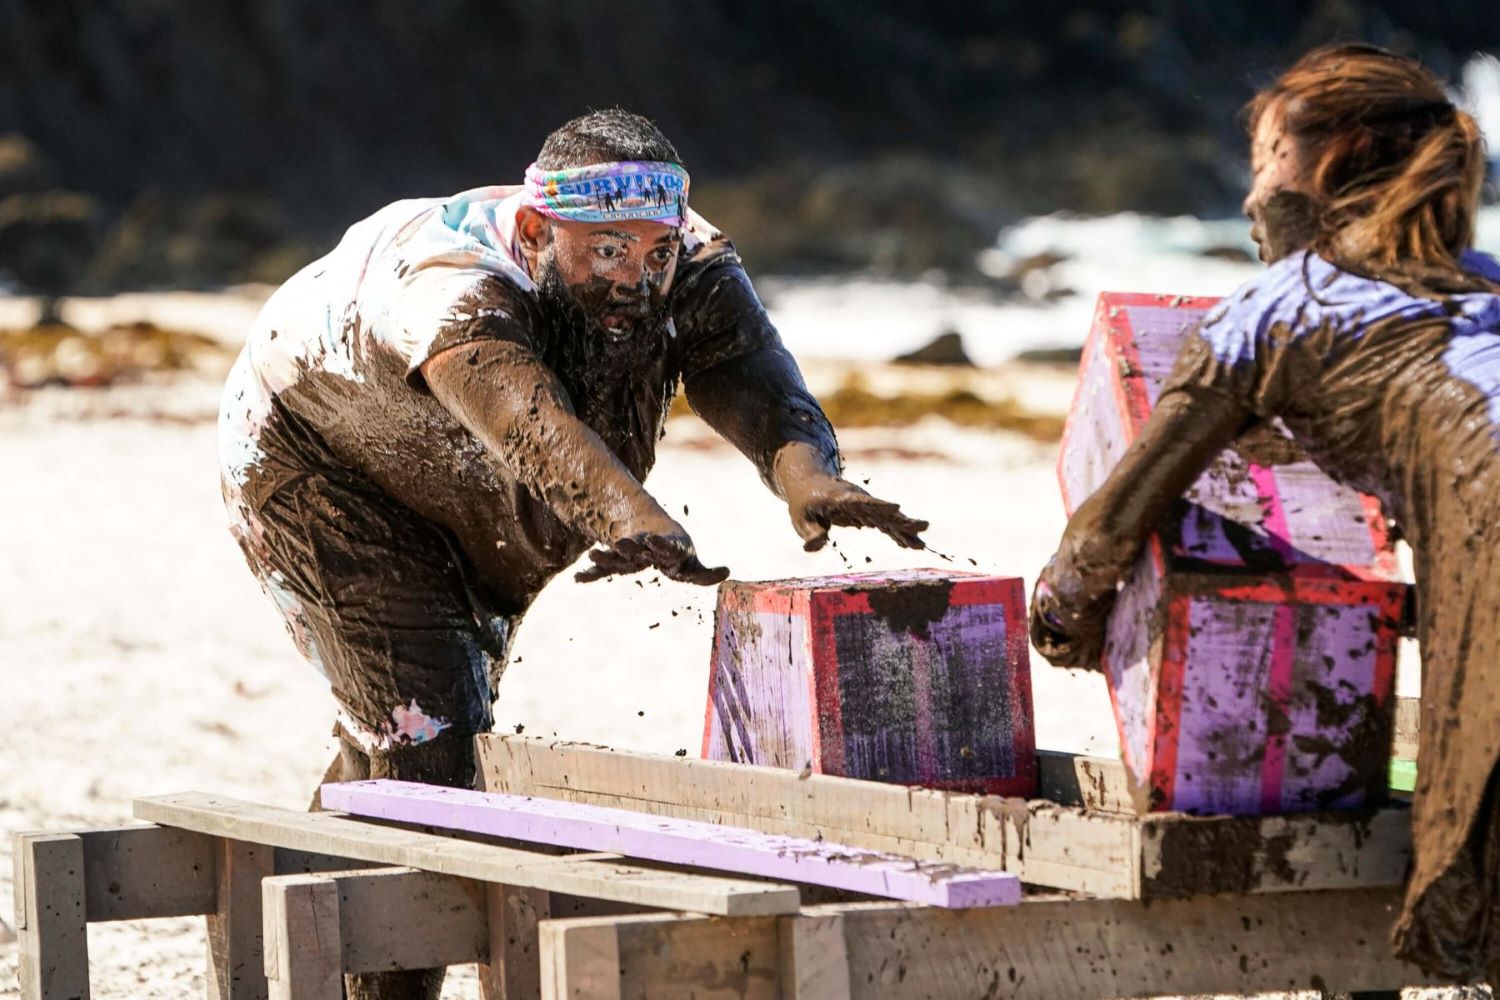 Yamil "Yam Yam" Arocho gets muddy during a challenge in the 'Survivor 44' premiere, which, according to spoilers, features a medical evacuation. Yam Yam's clothes are covered in mud and he wears his purple 'Survivor' buff around his head.